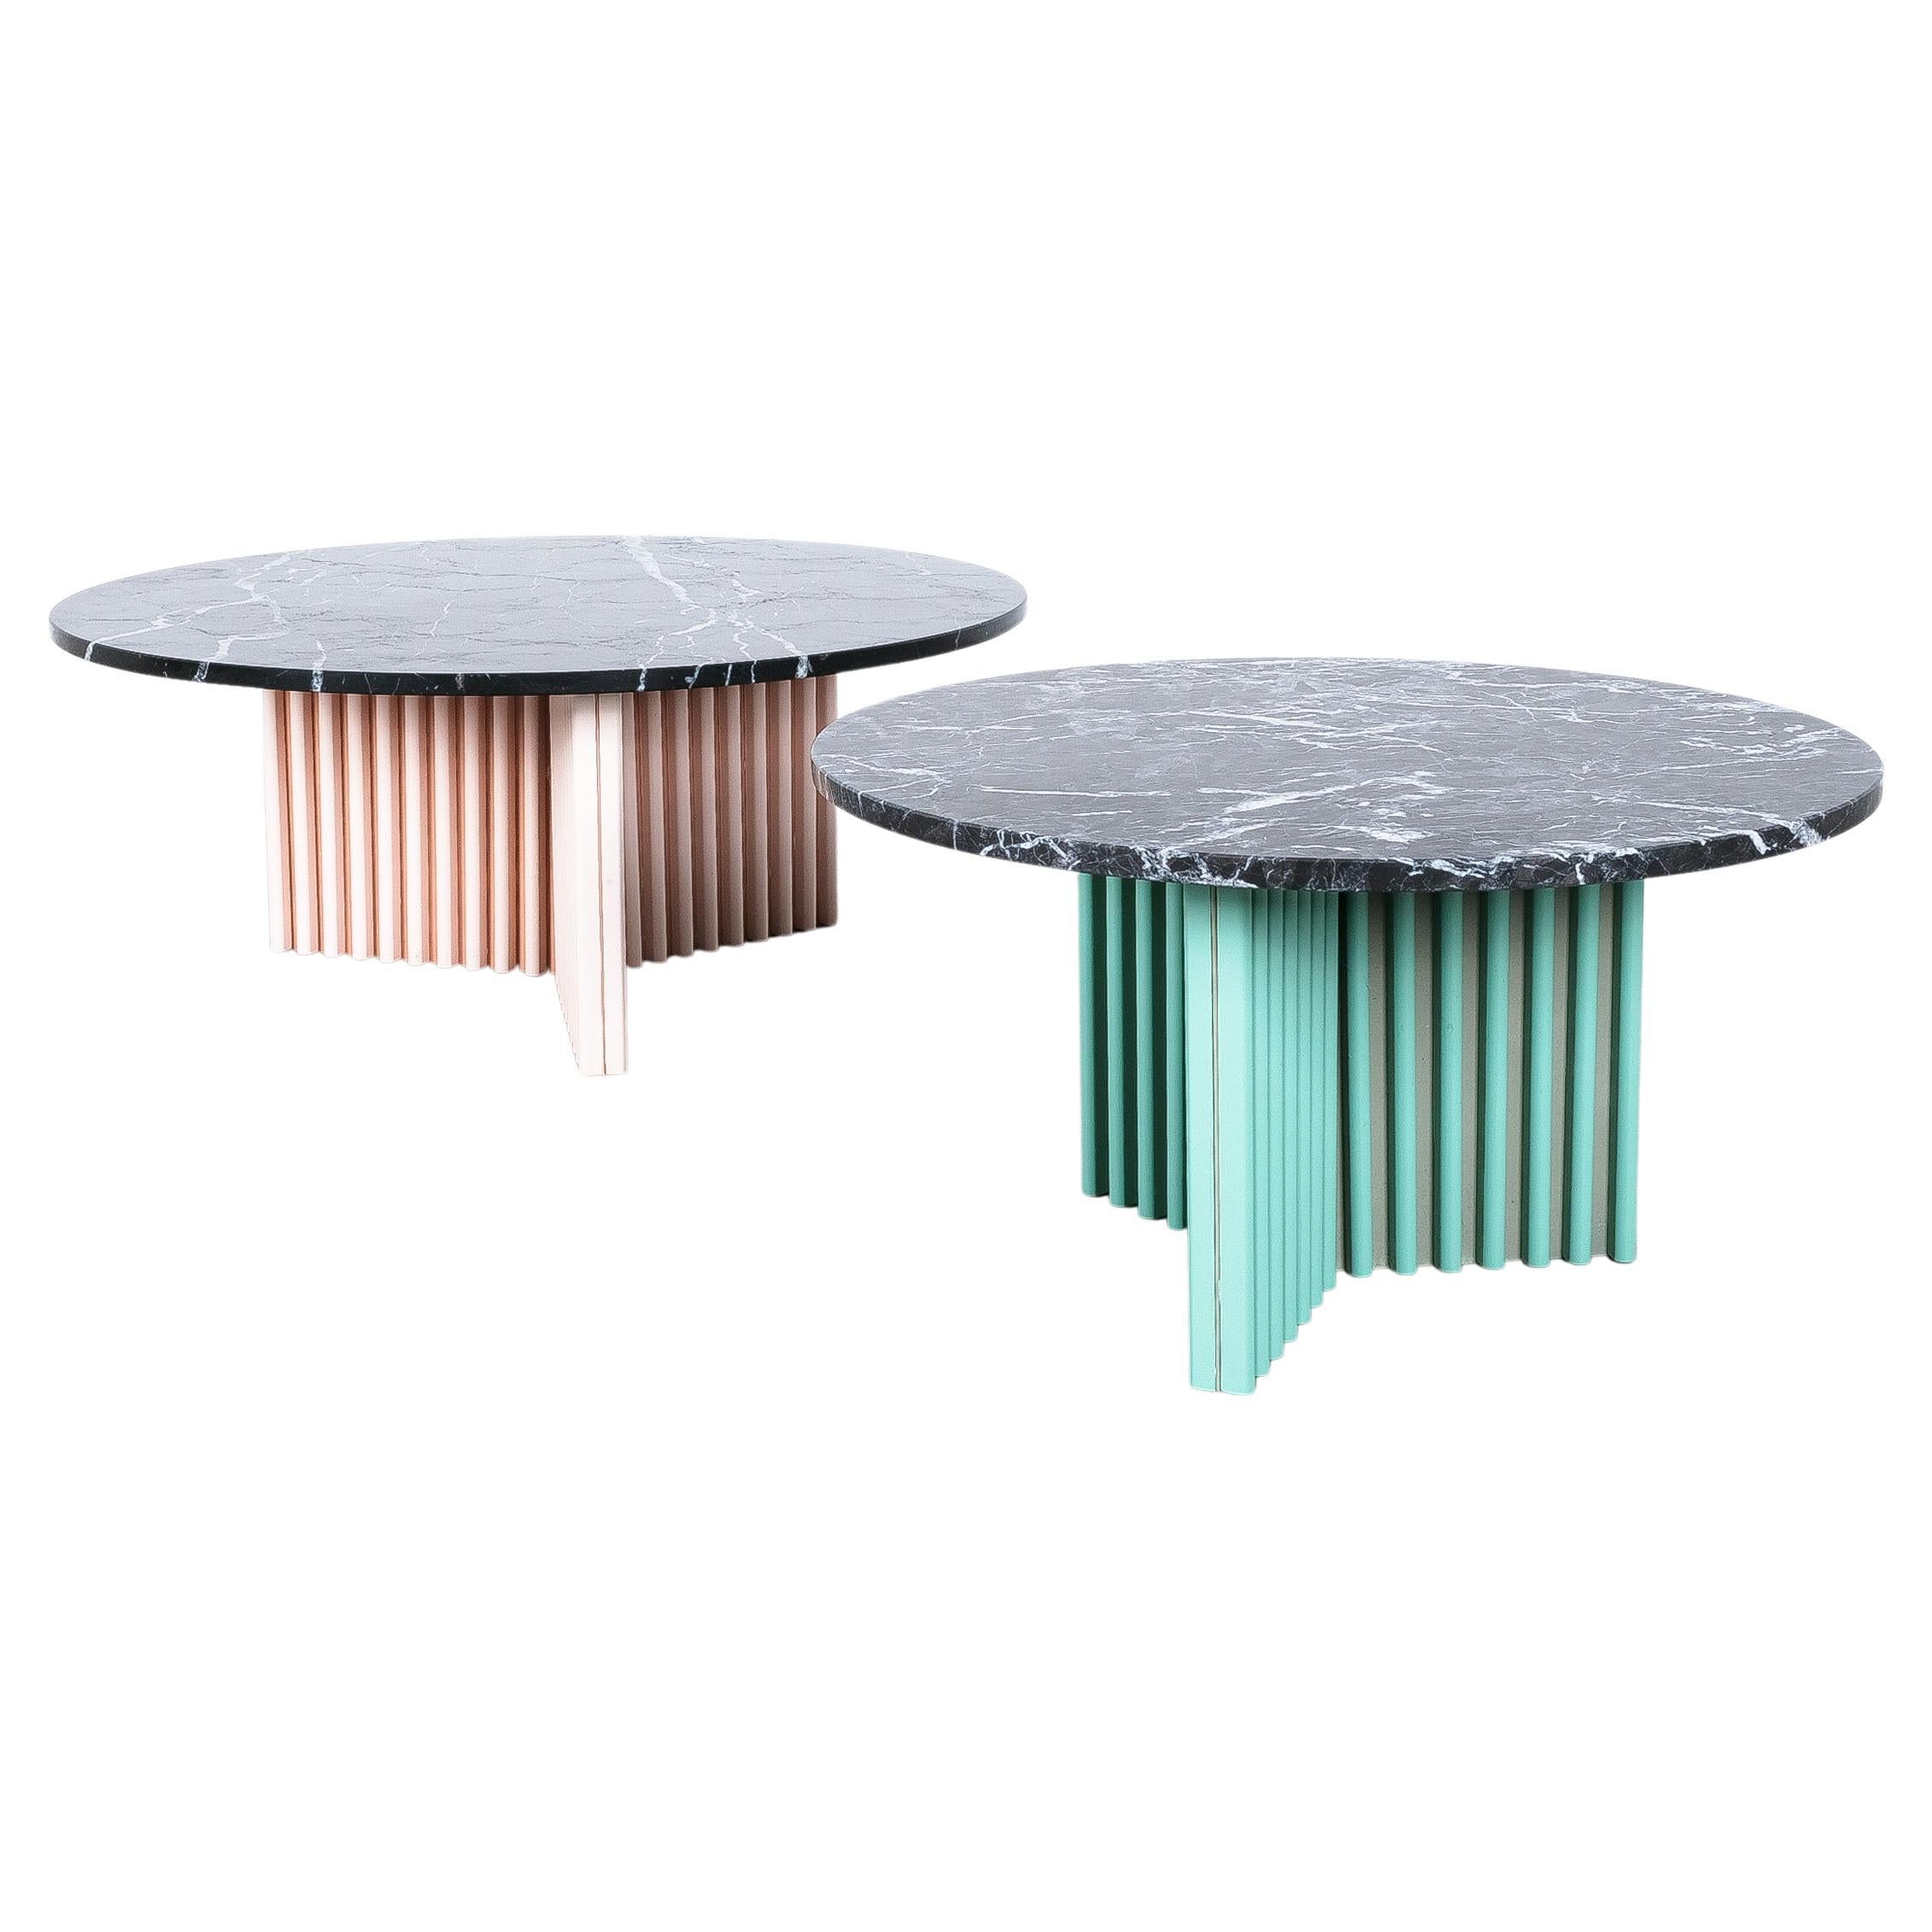 Bespoke Black Marble Carrara Tables Side Tables, France, circa 1990 For Sale 6